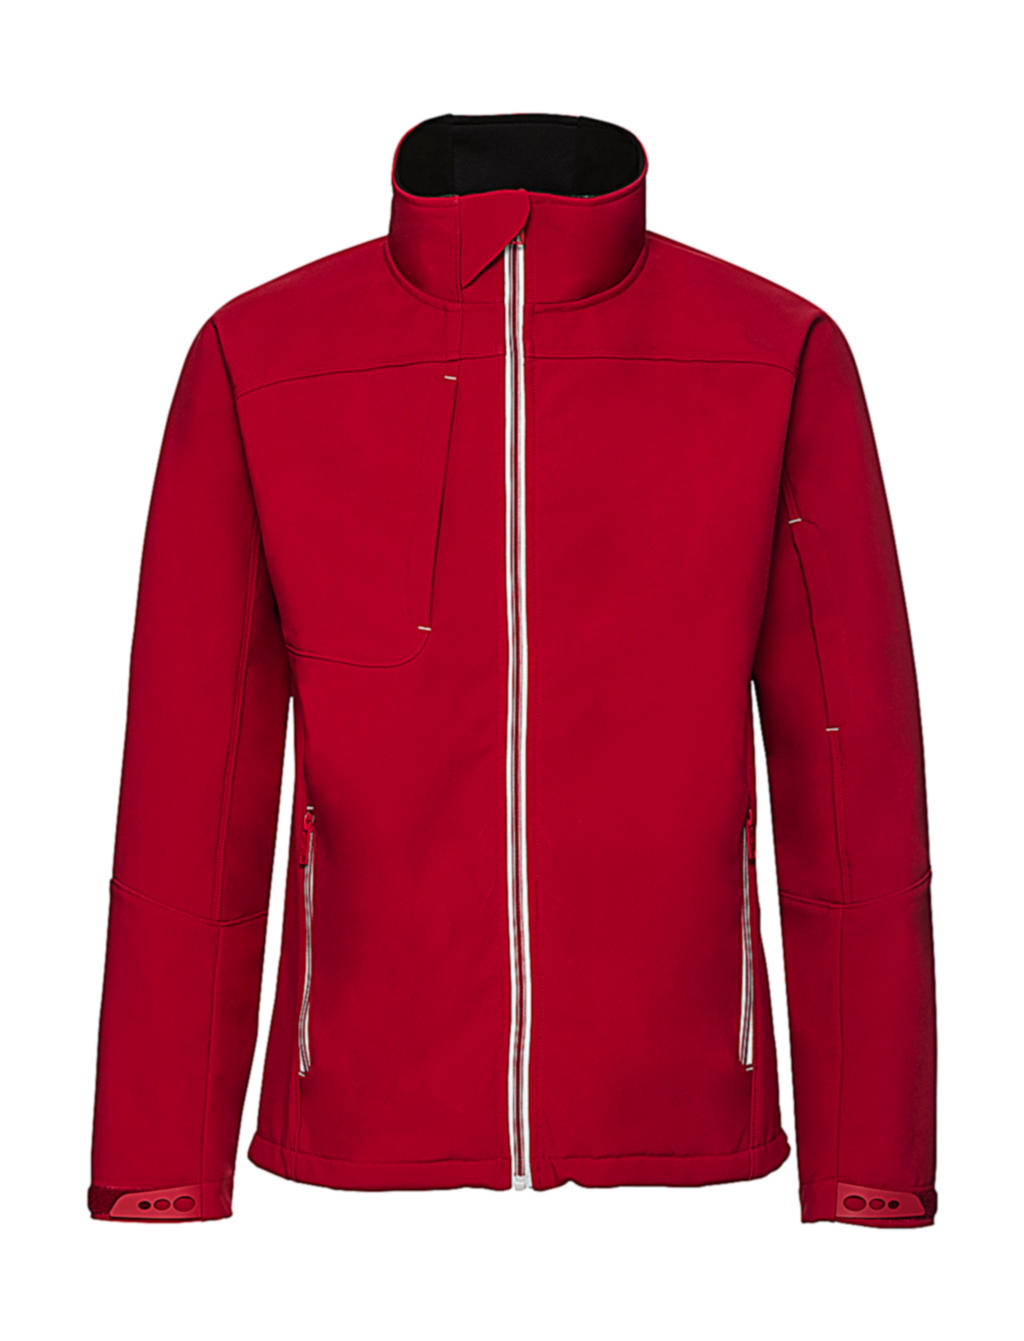  Mens Bionic Softshell Jacket in Farbe Classic Red